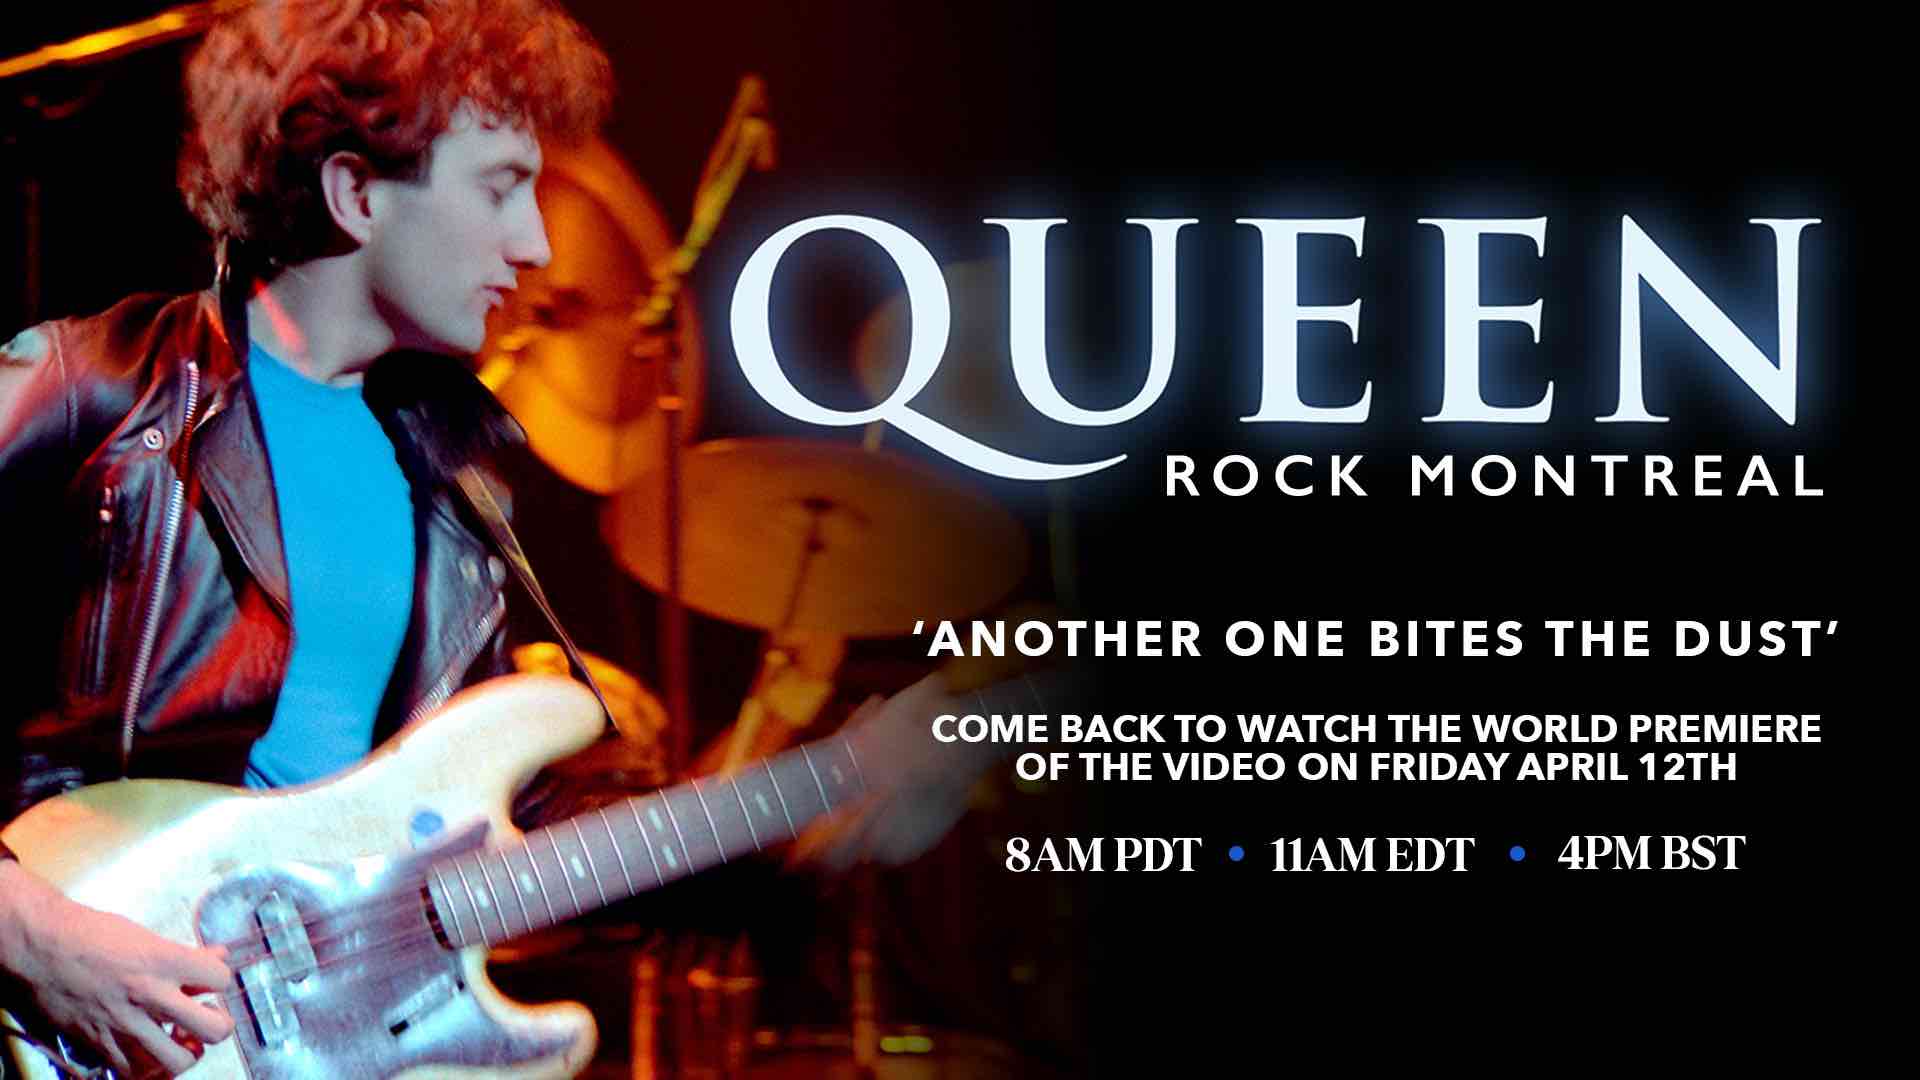 presentation about queen band